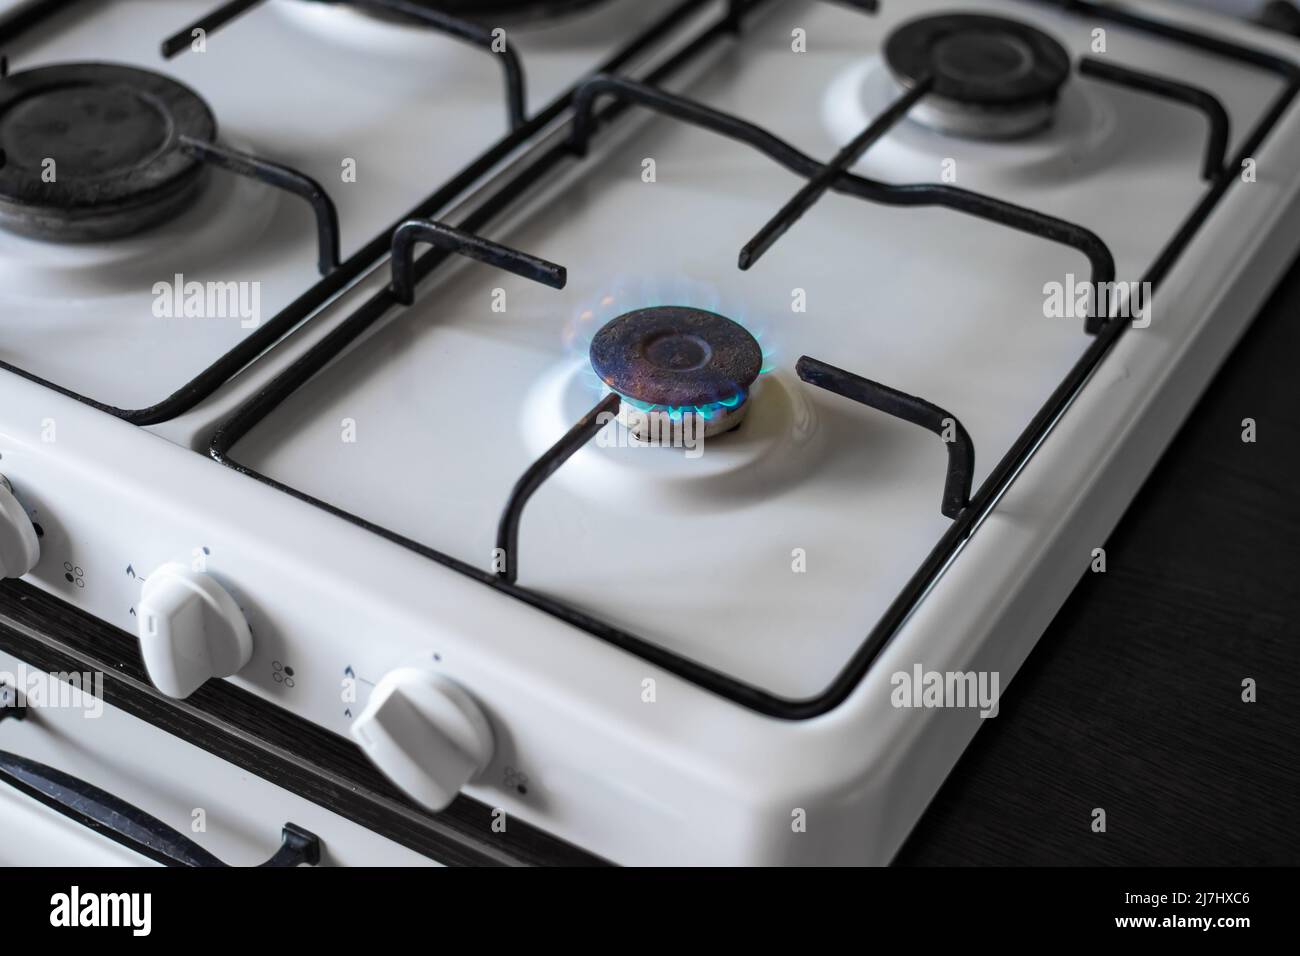 Gas stove burner with burning gas. Sale and purchase of gas fuel. Stock Photo